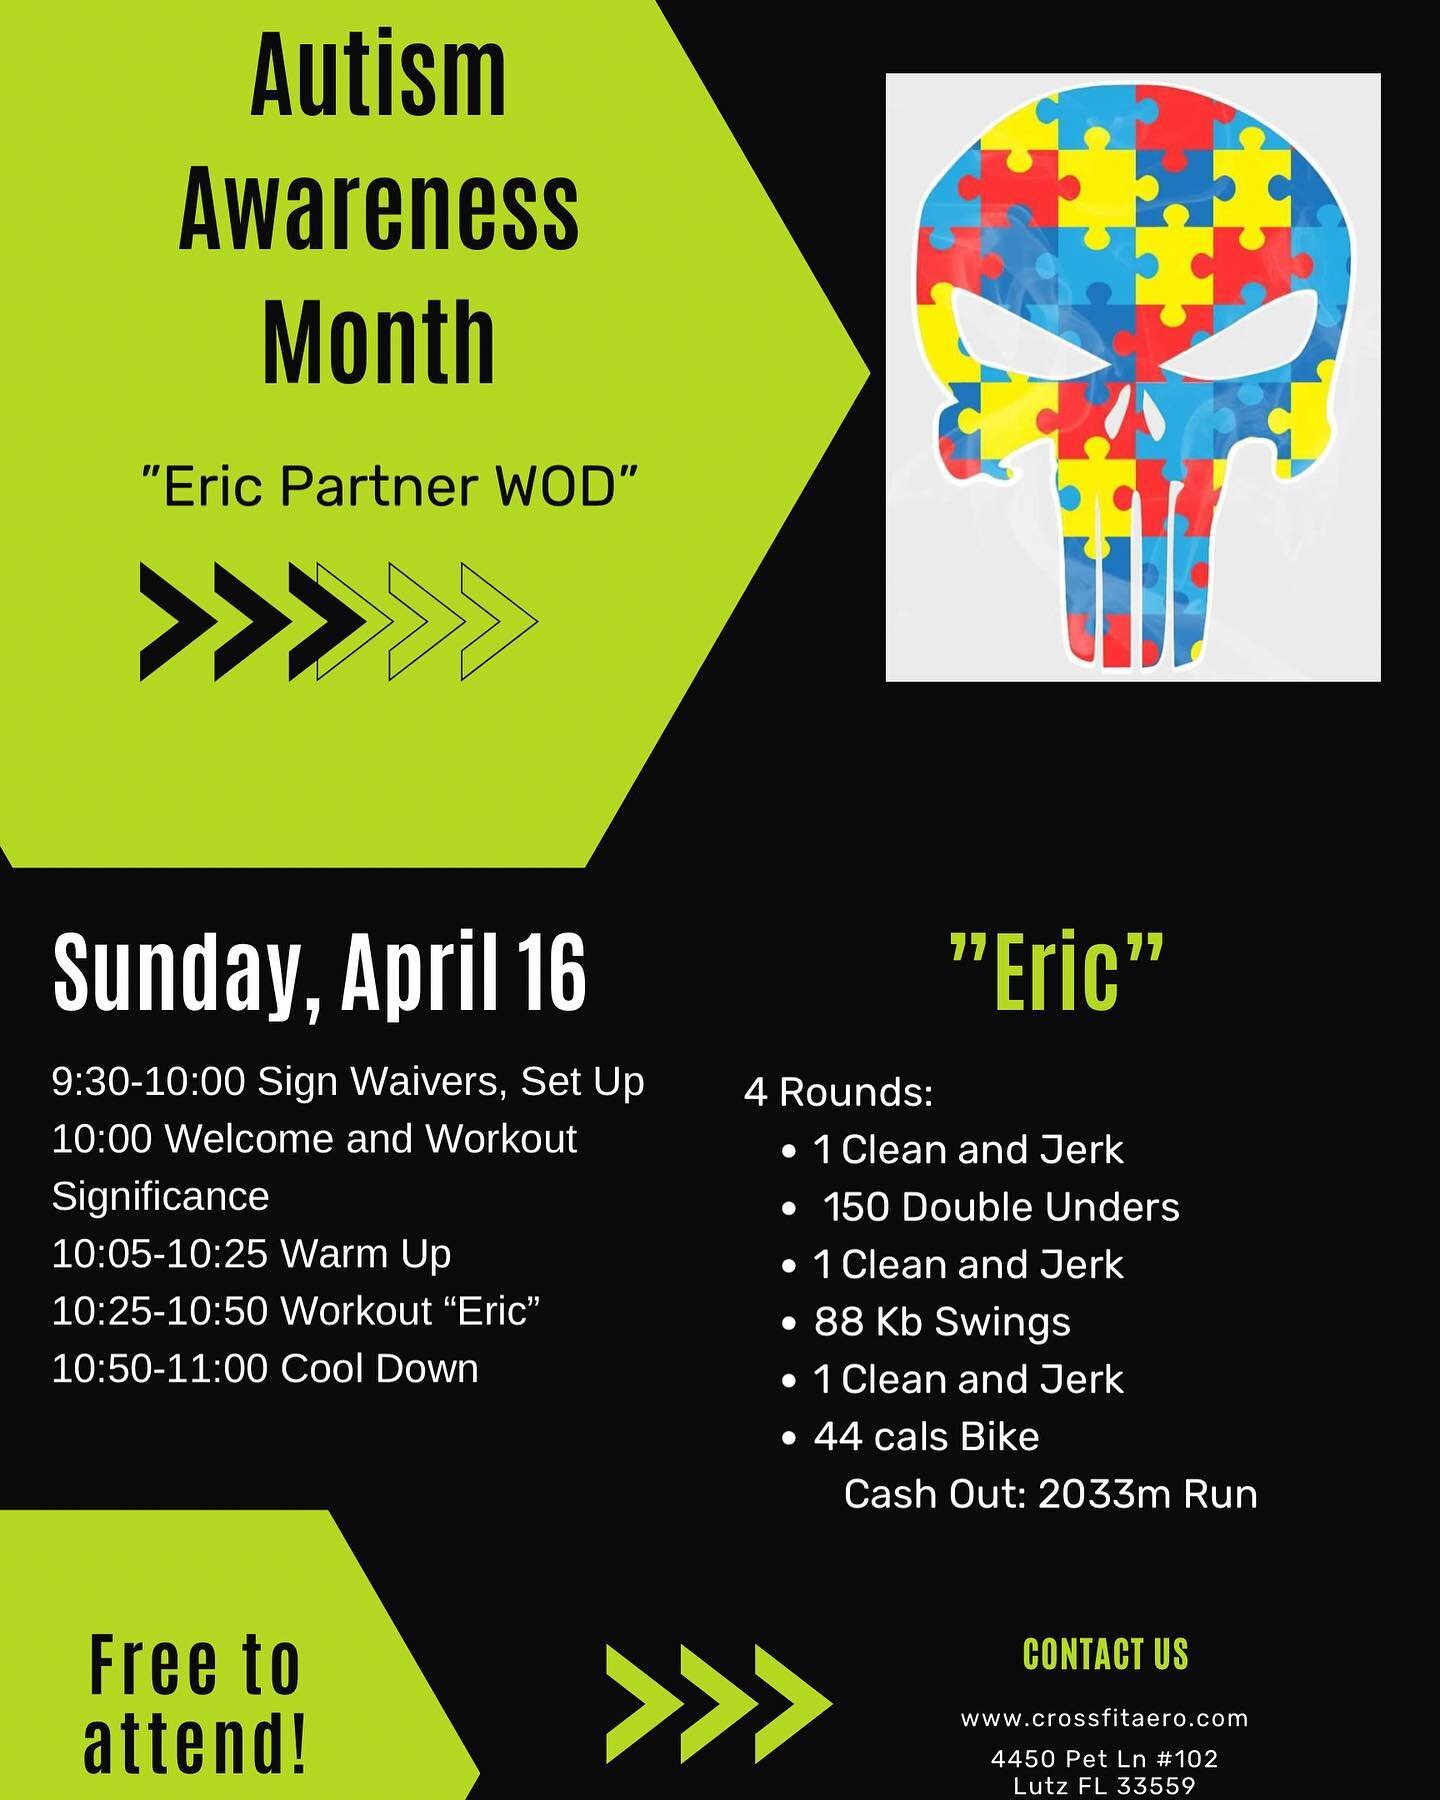 Don&rsquo;t forget about our special partner WOD &ldquo;Eric&rdquo; for Autism Awareness Month. 💙 Thank you @caiti_epic for bringing this special workout to our attention. Come get a great workout in for an even better cause on Sunday, April 16! #cr